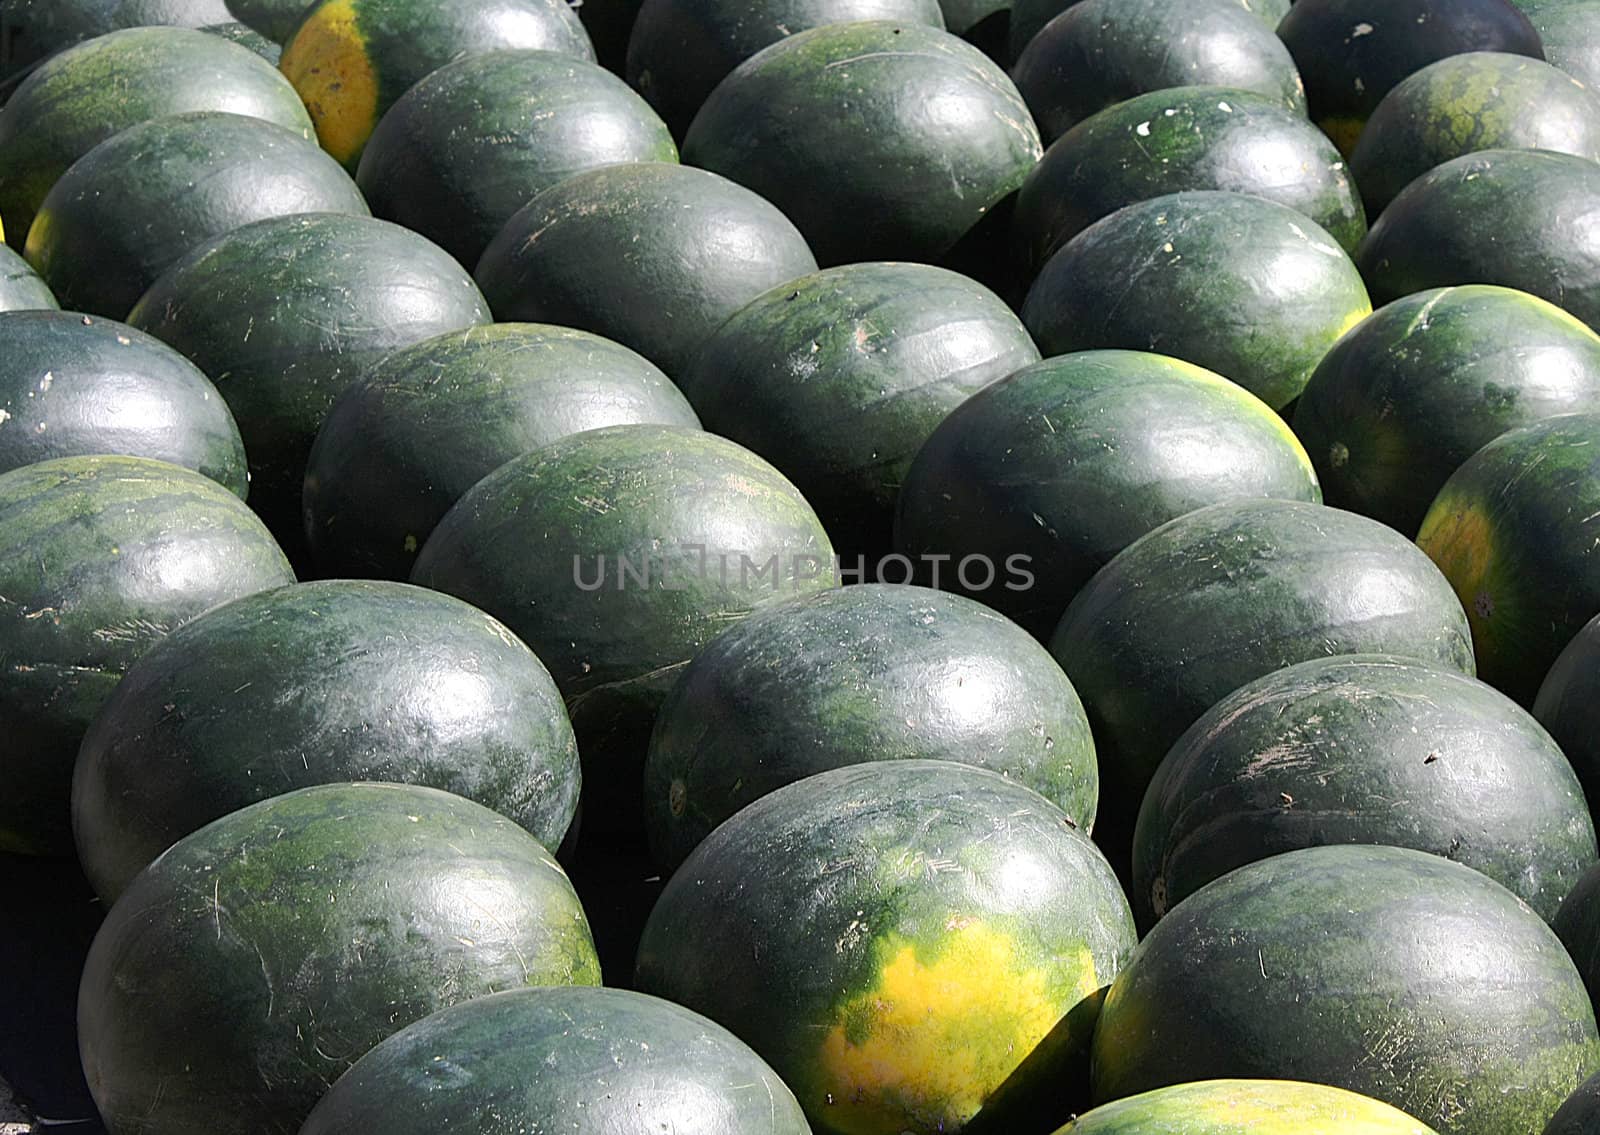 Background of watermelons on display in market.